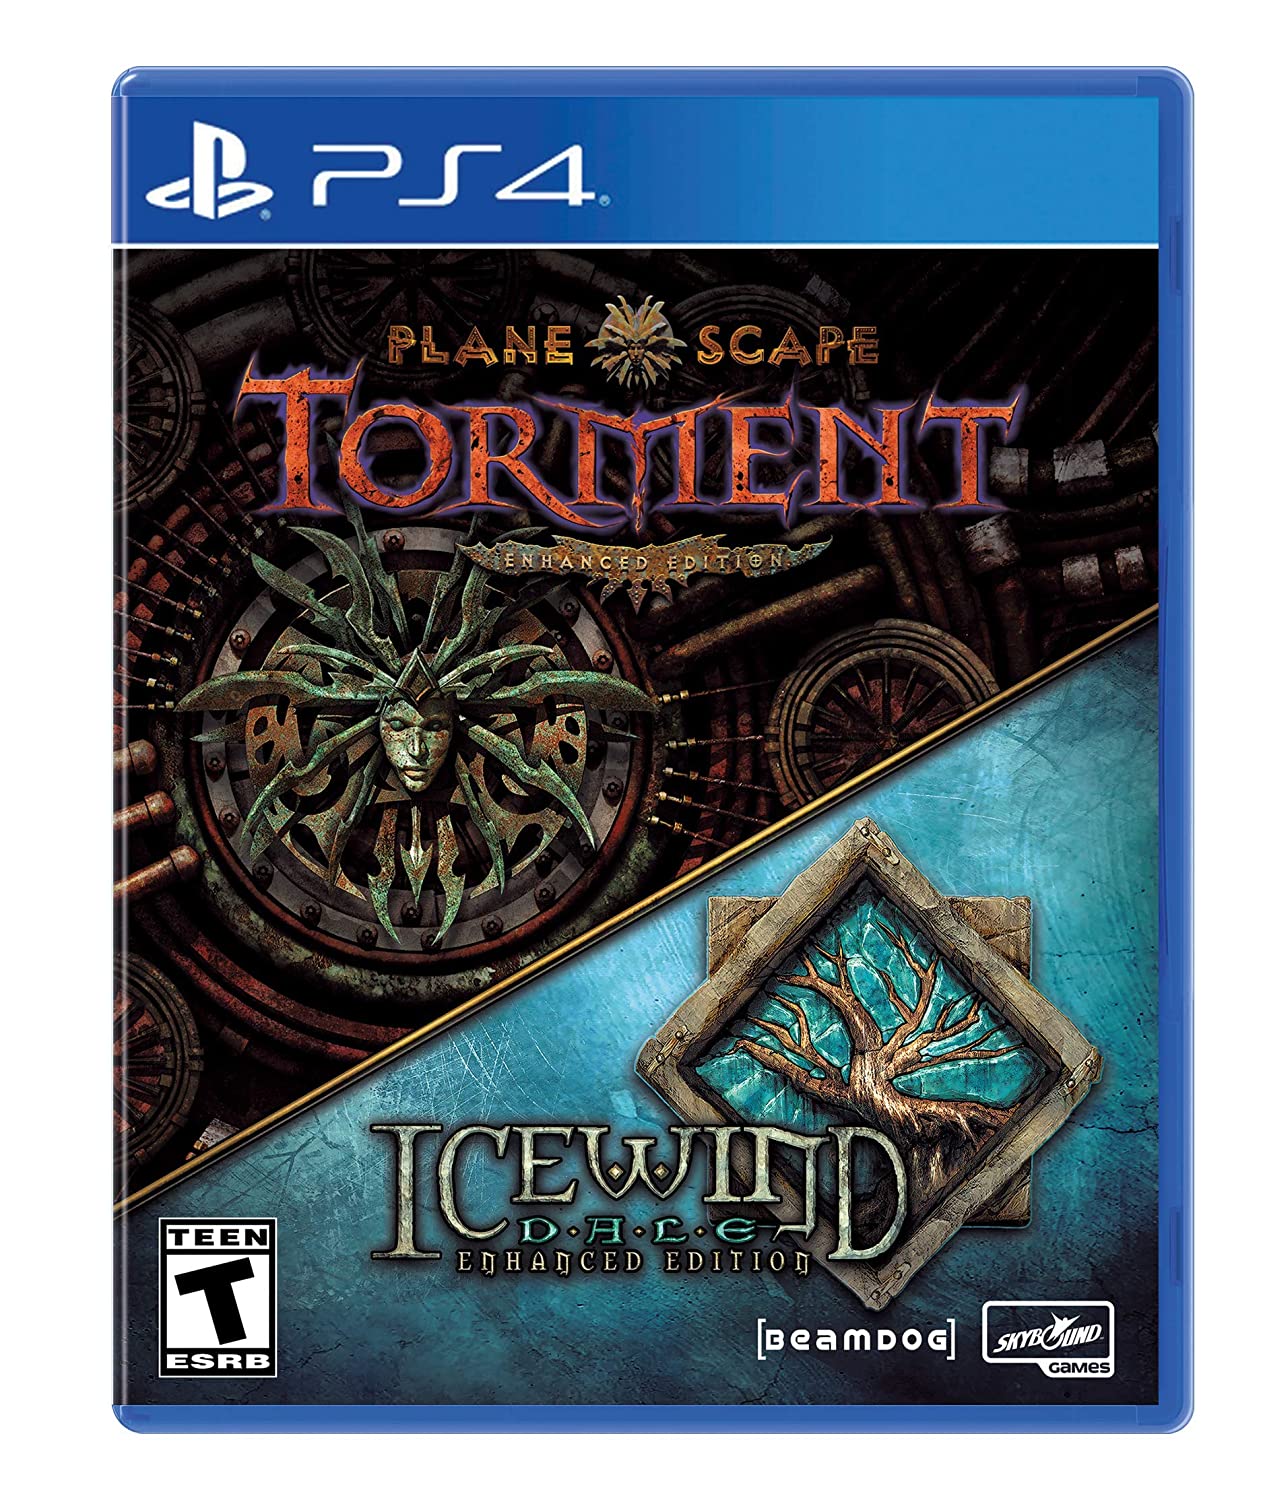 Planescape Torment &amp; Icewind